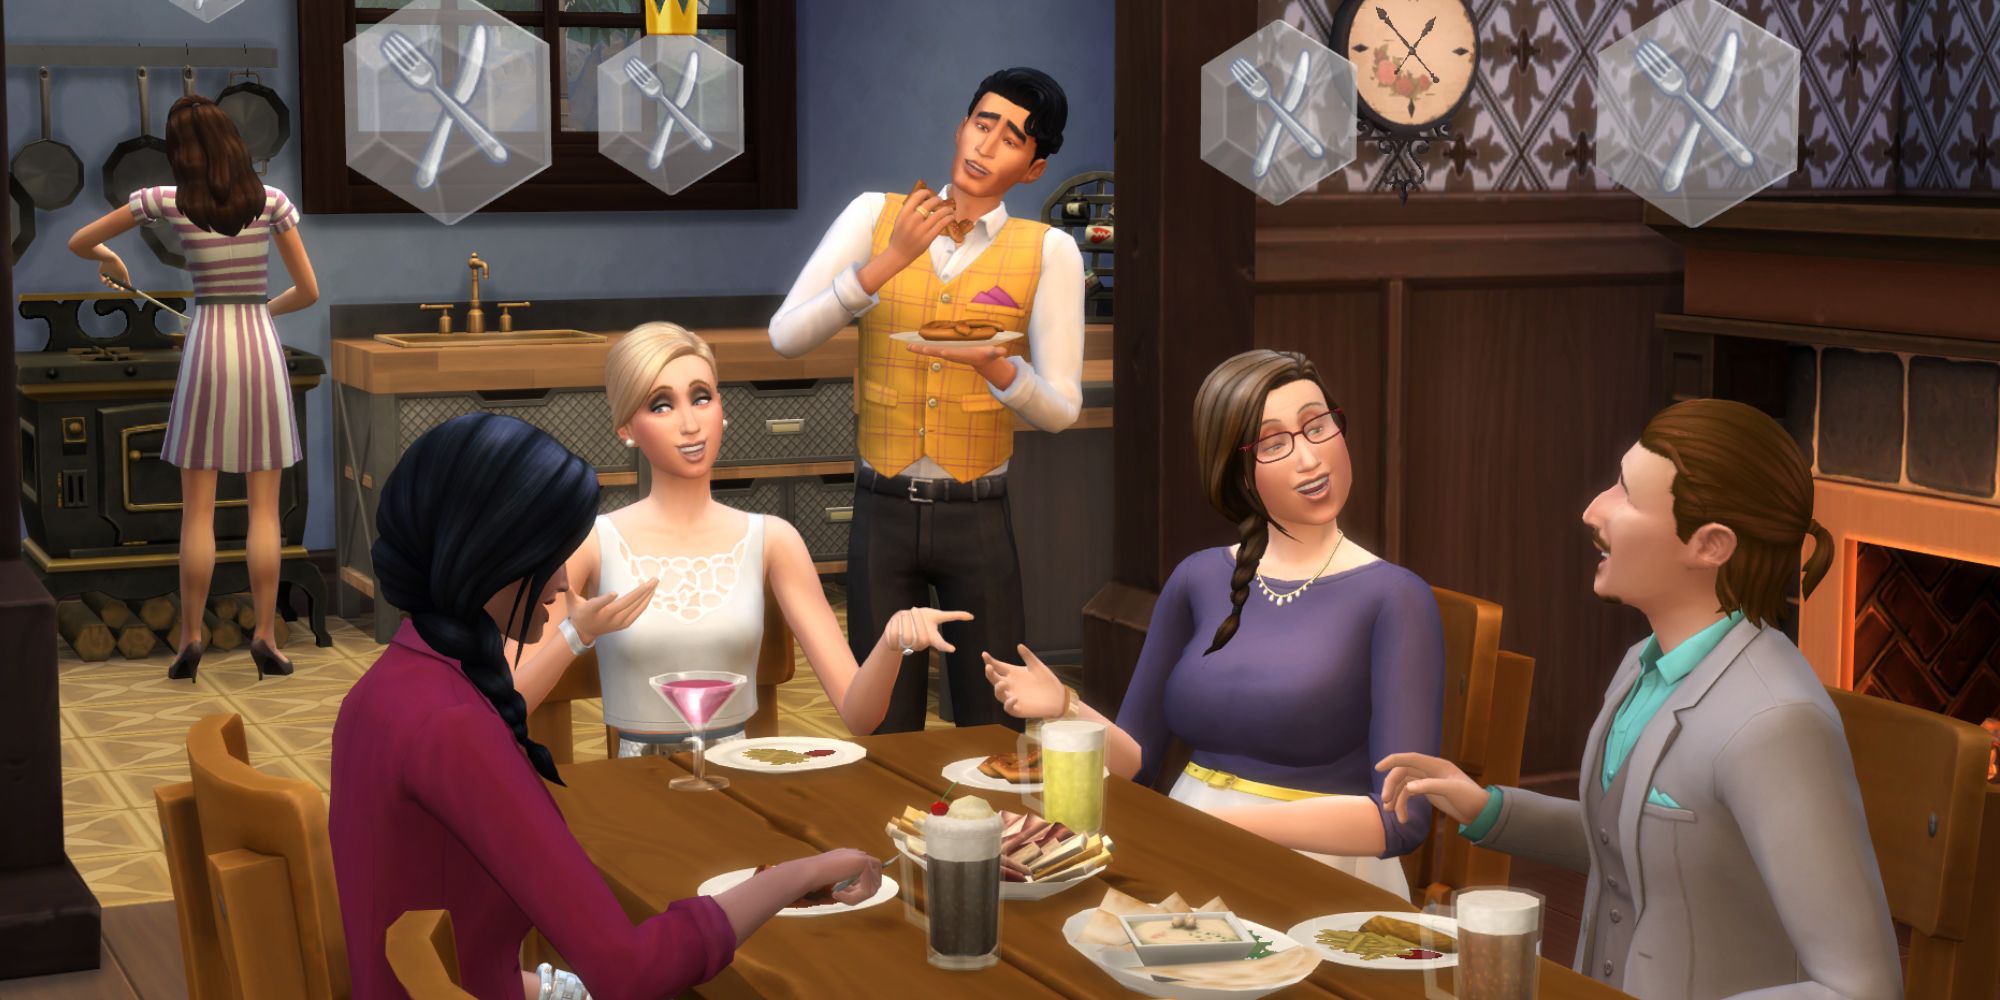 Sims 4 get together group having a meal together